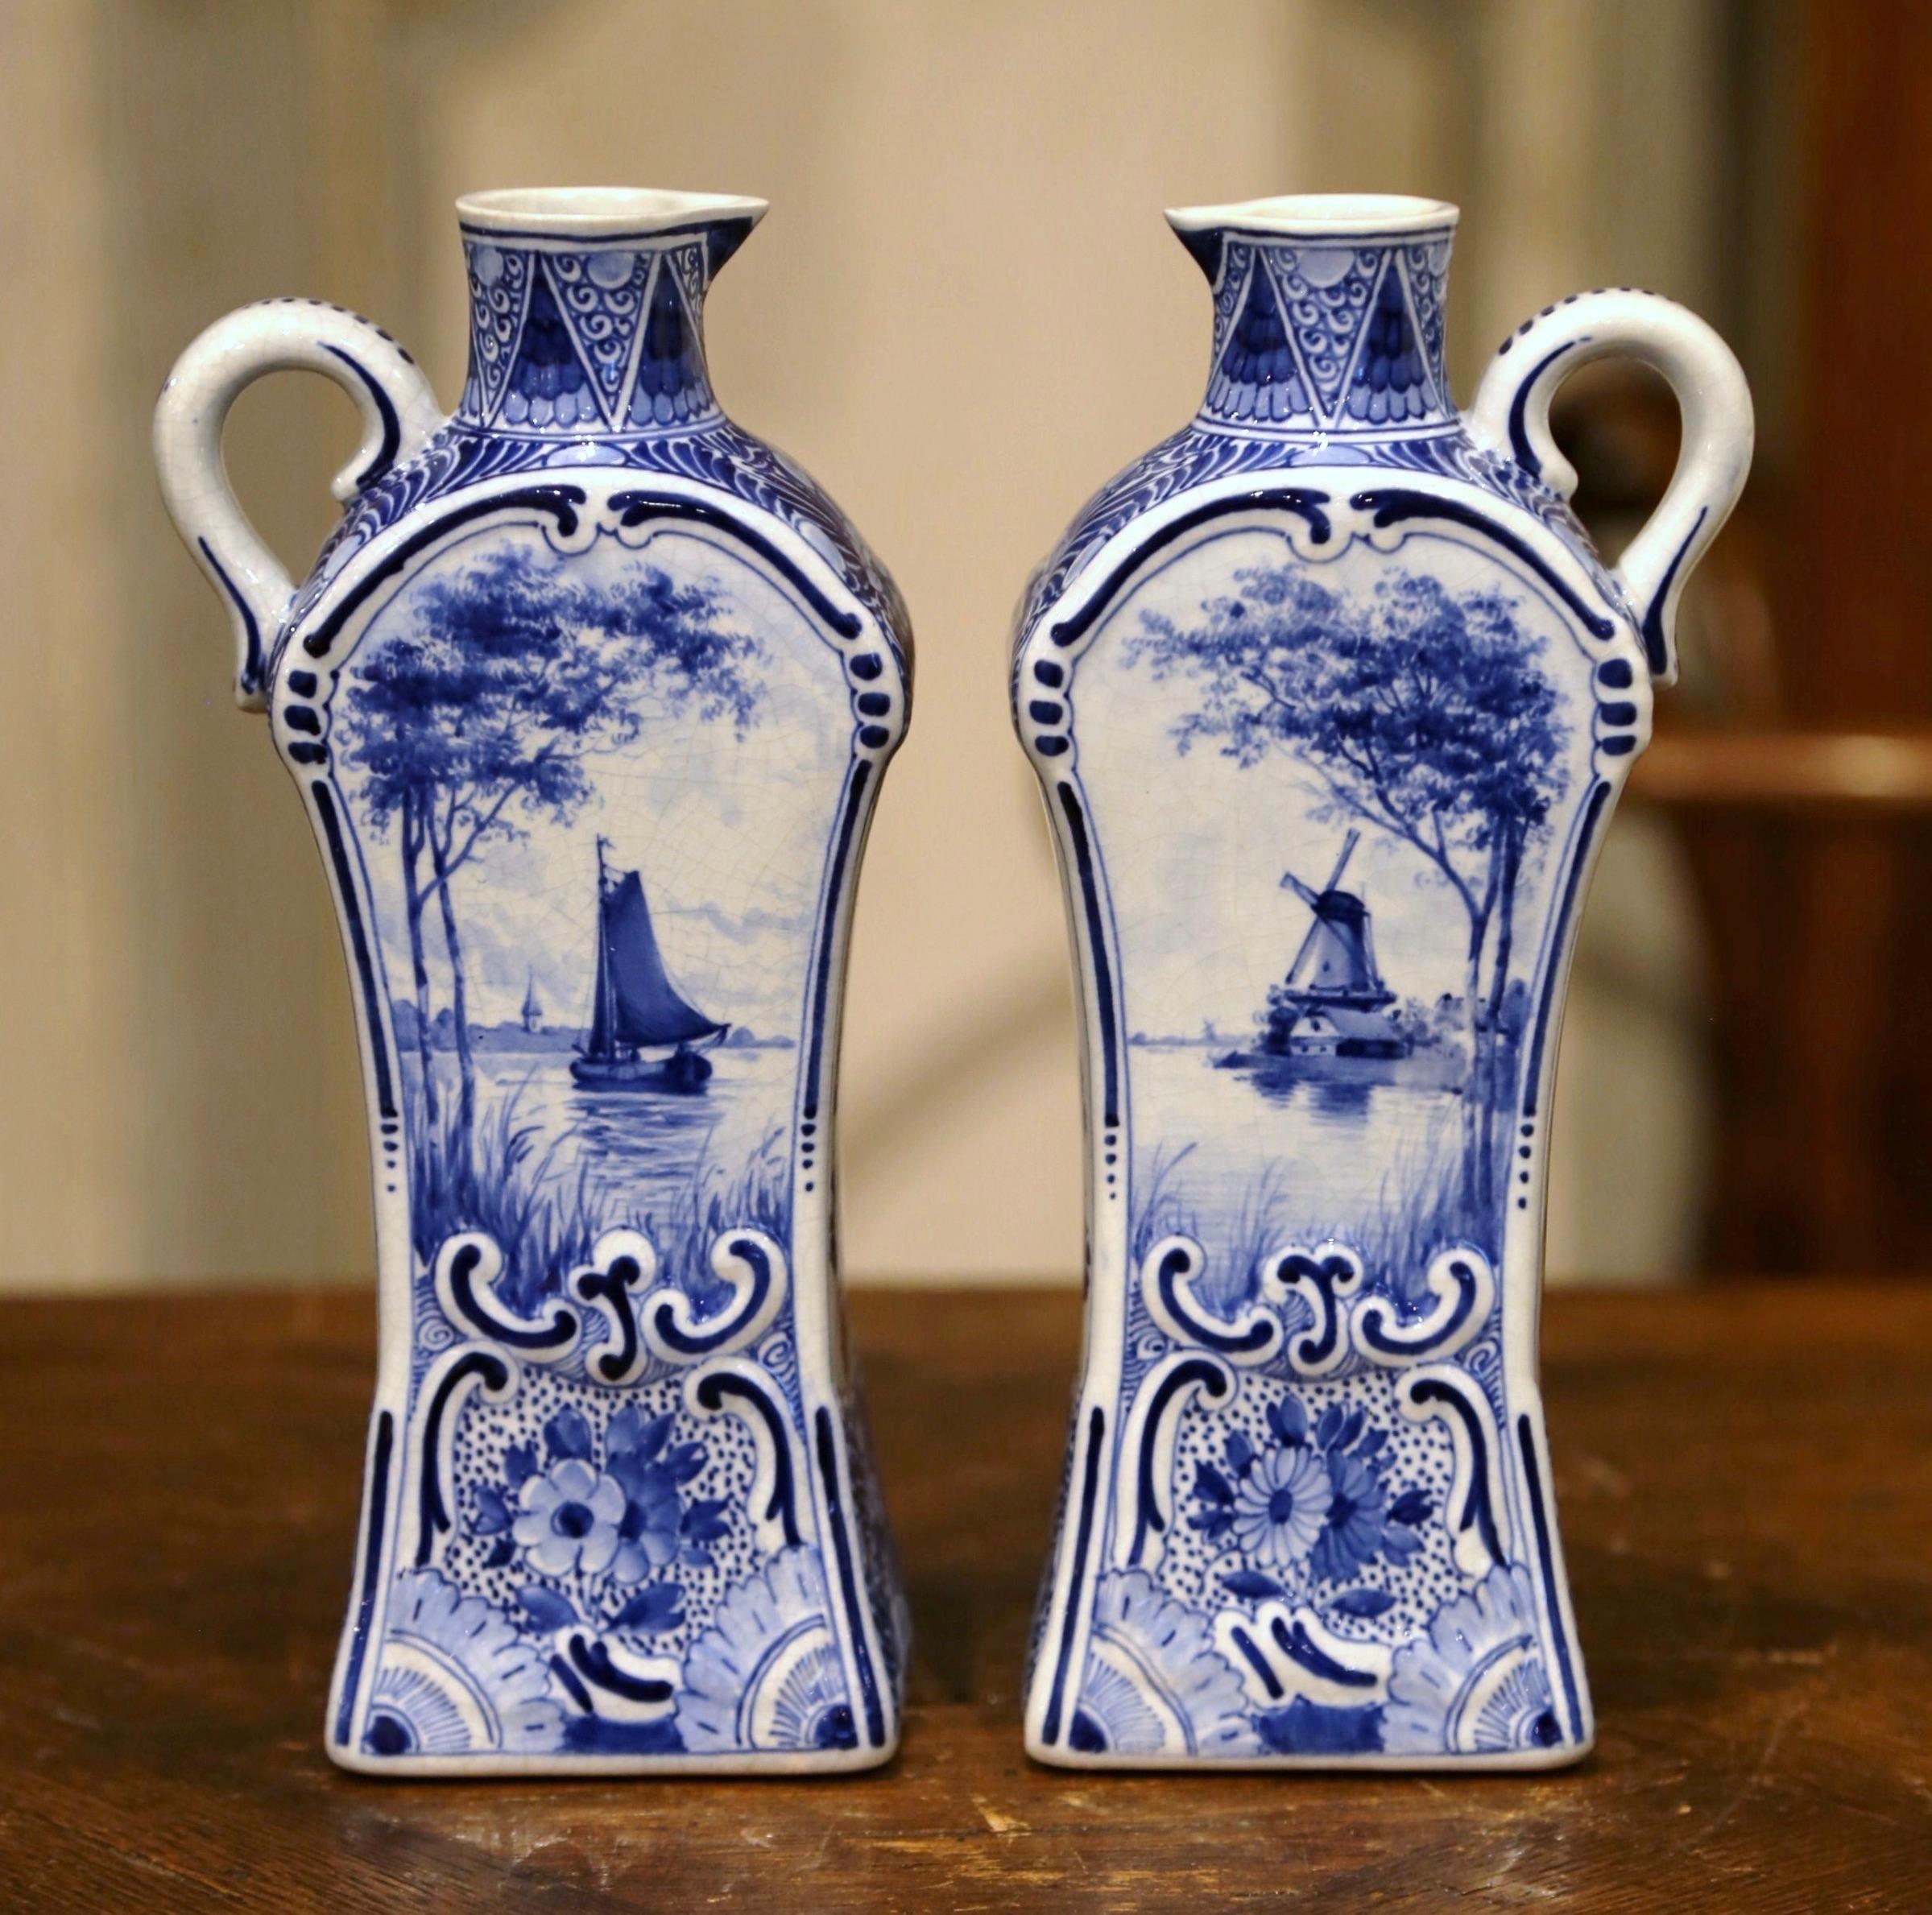 Ceramic Pair of Early 20th Century Dutch Painted Faience Delft Oil or Vinegar Bottles For Sale